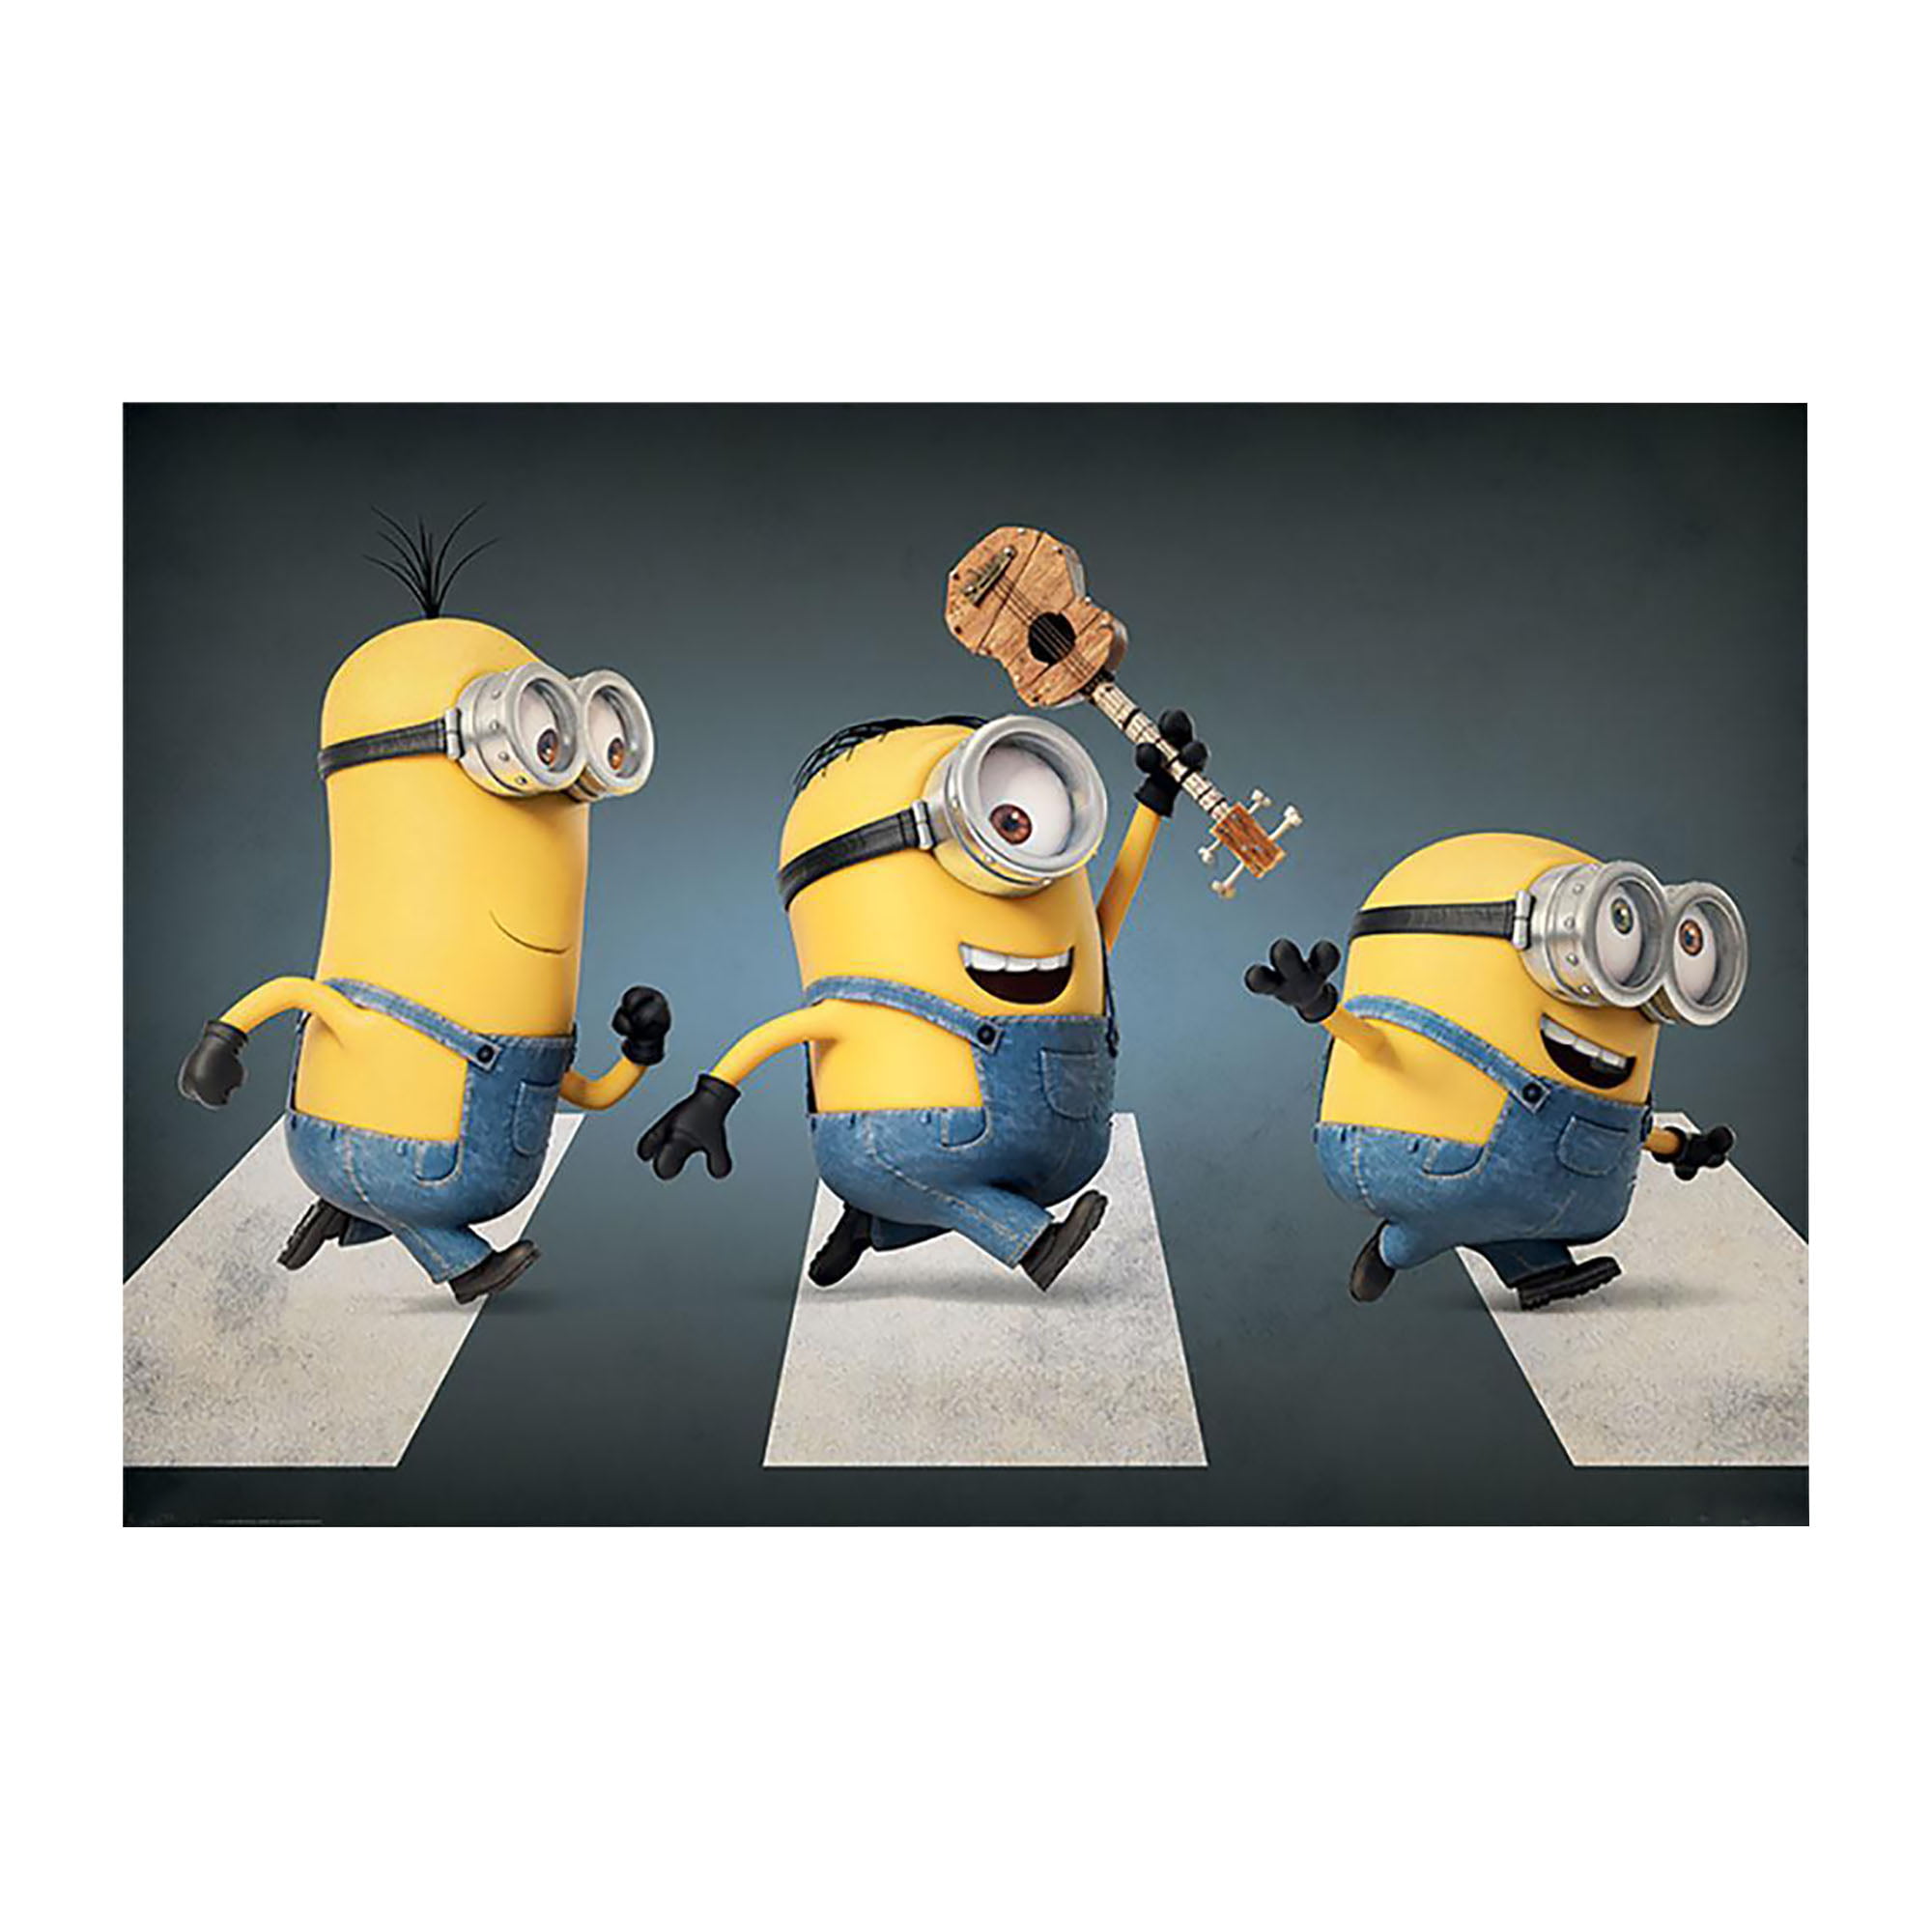 DESPICABLE ME ~ MINIONS ABBEY ROAD ~ 24x36 CARTOON POSTER 